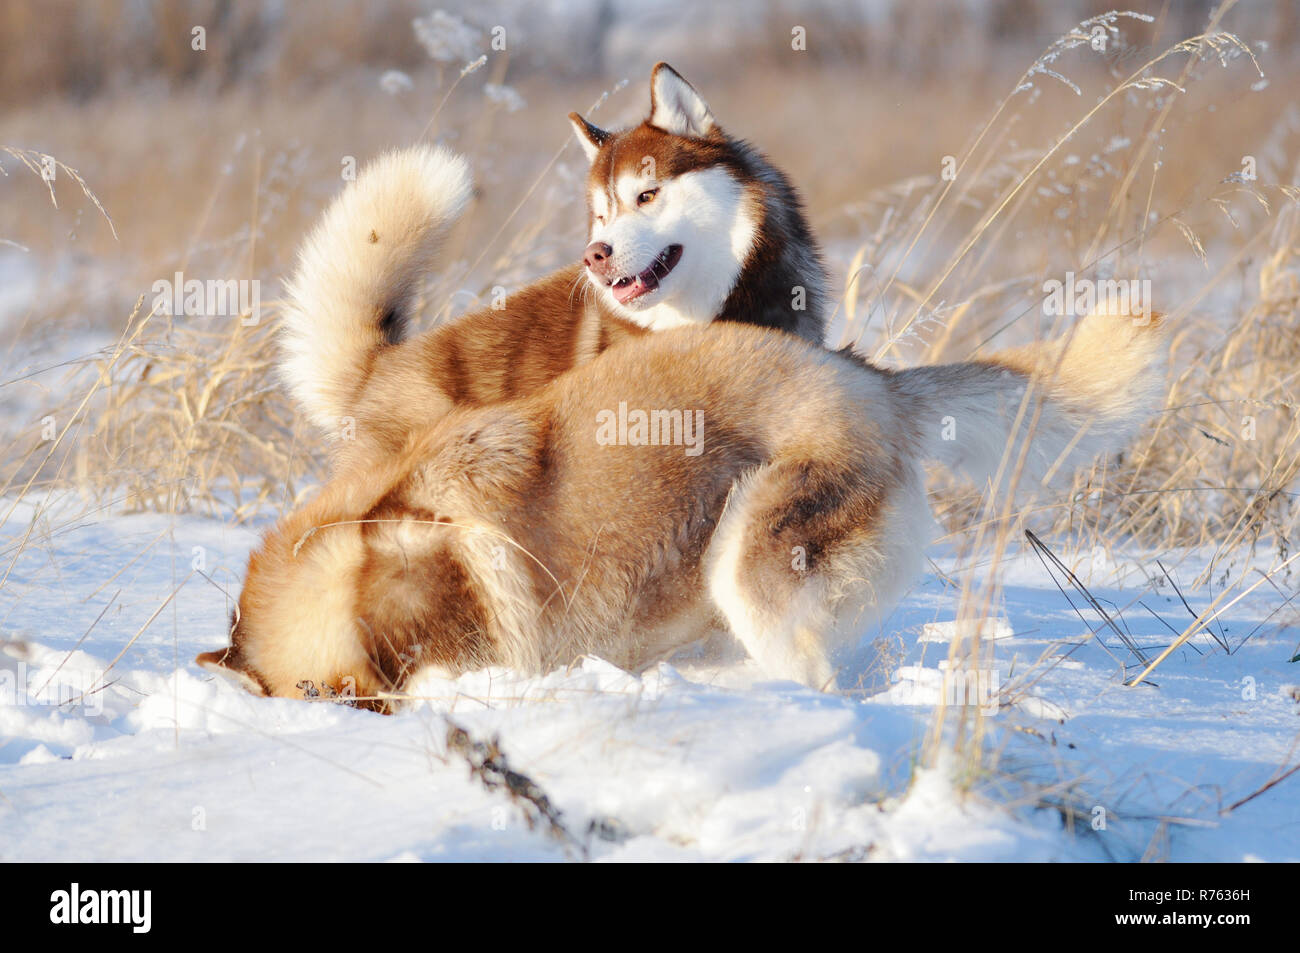 Two Red And White Siberian Huskies Dogs Playing Having Fun In Winter Outdoor Stock Photo Alamy